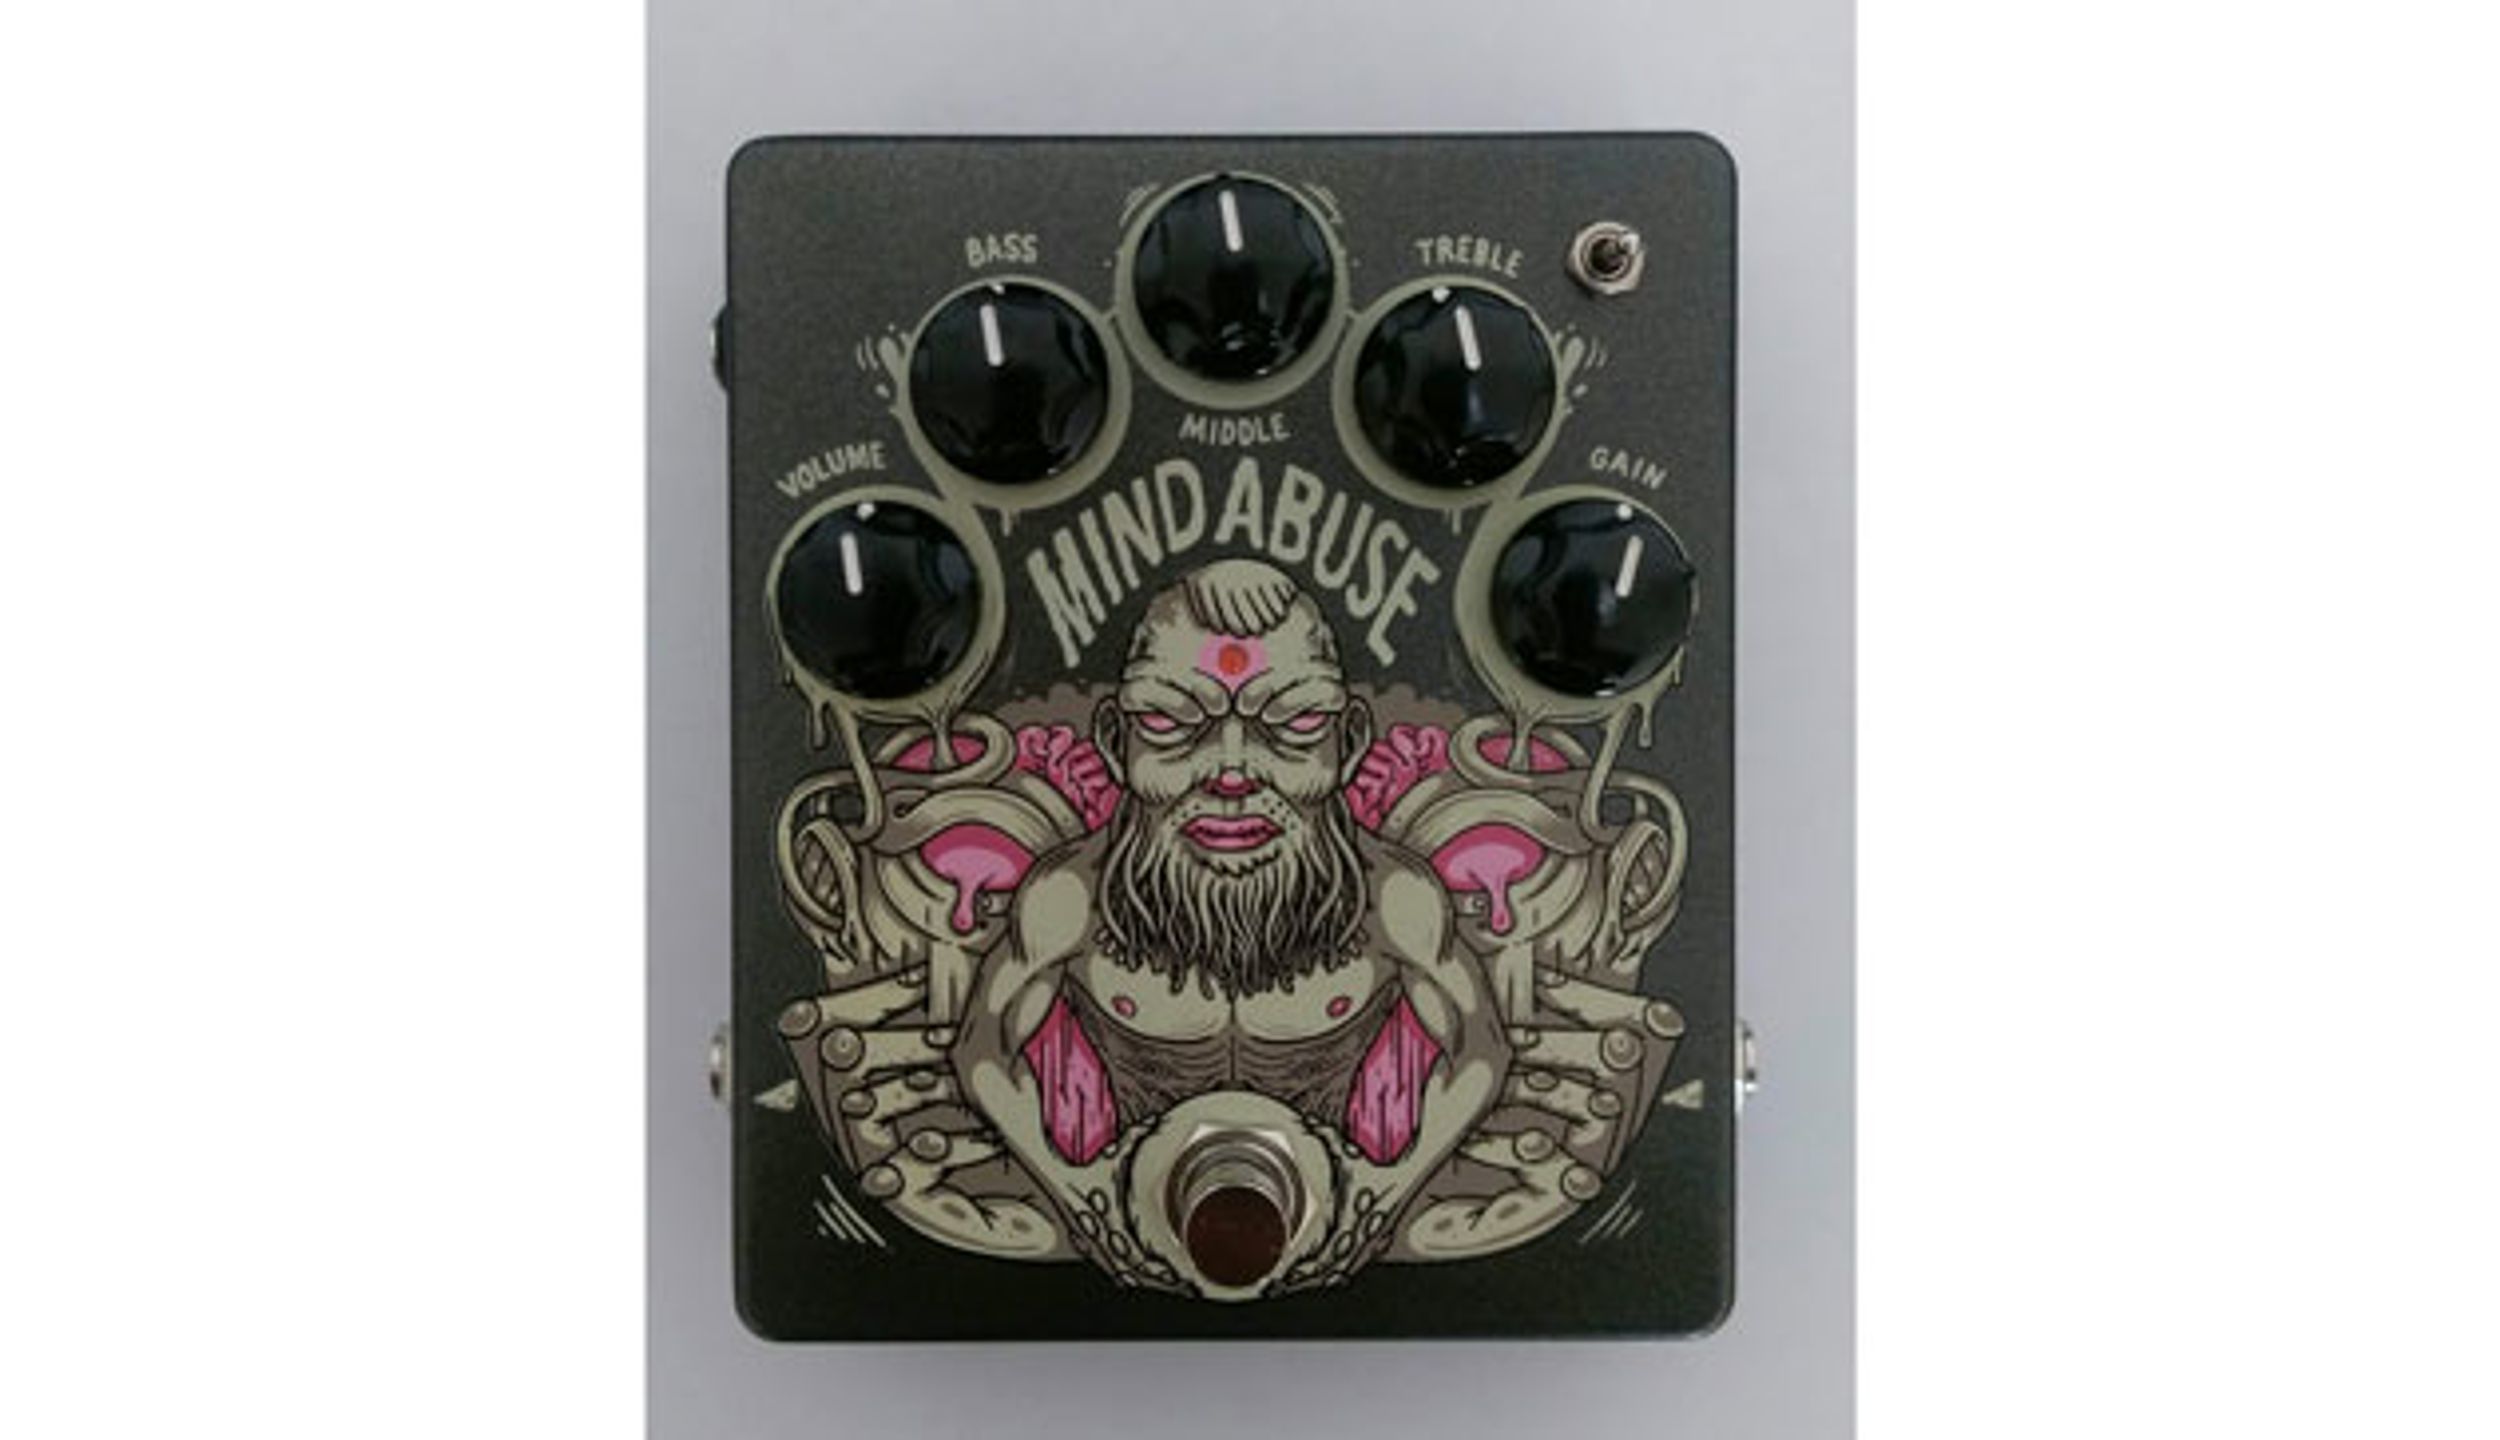 Rockfabrik Effects Introduces the Mind Abuse